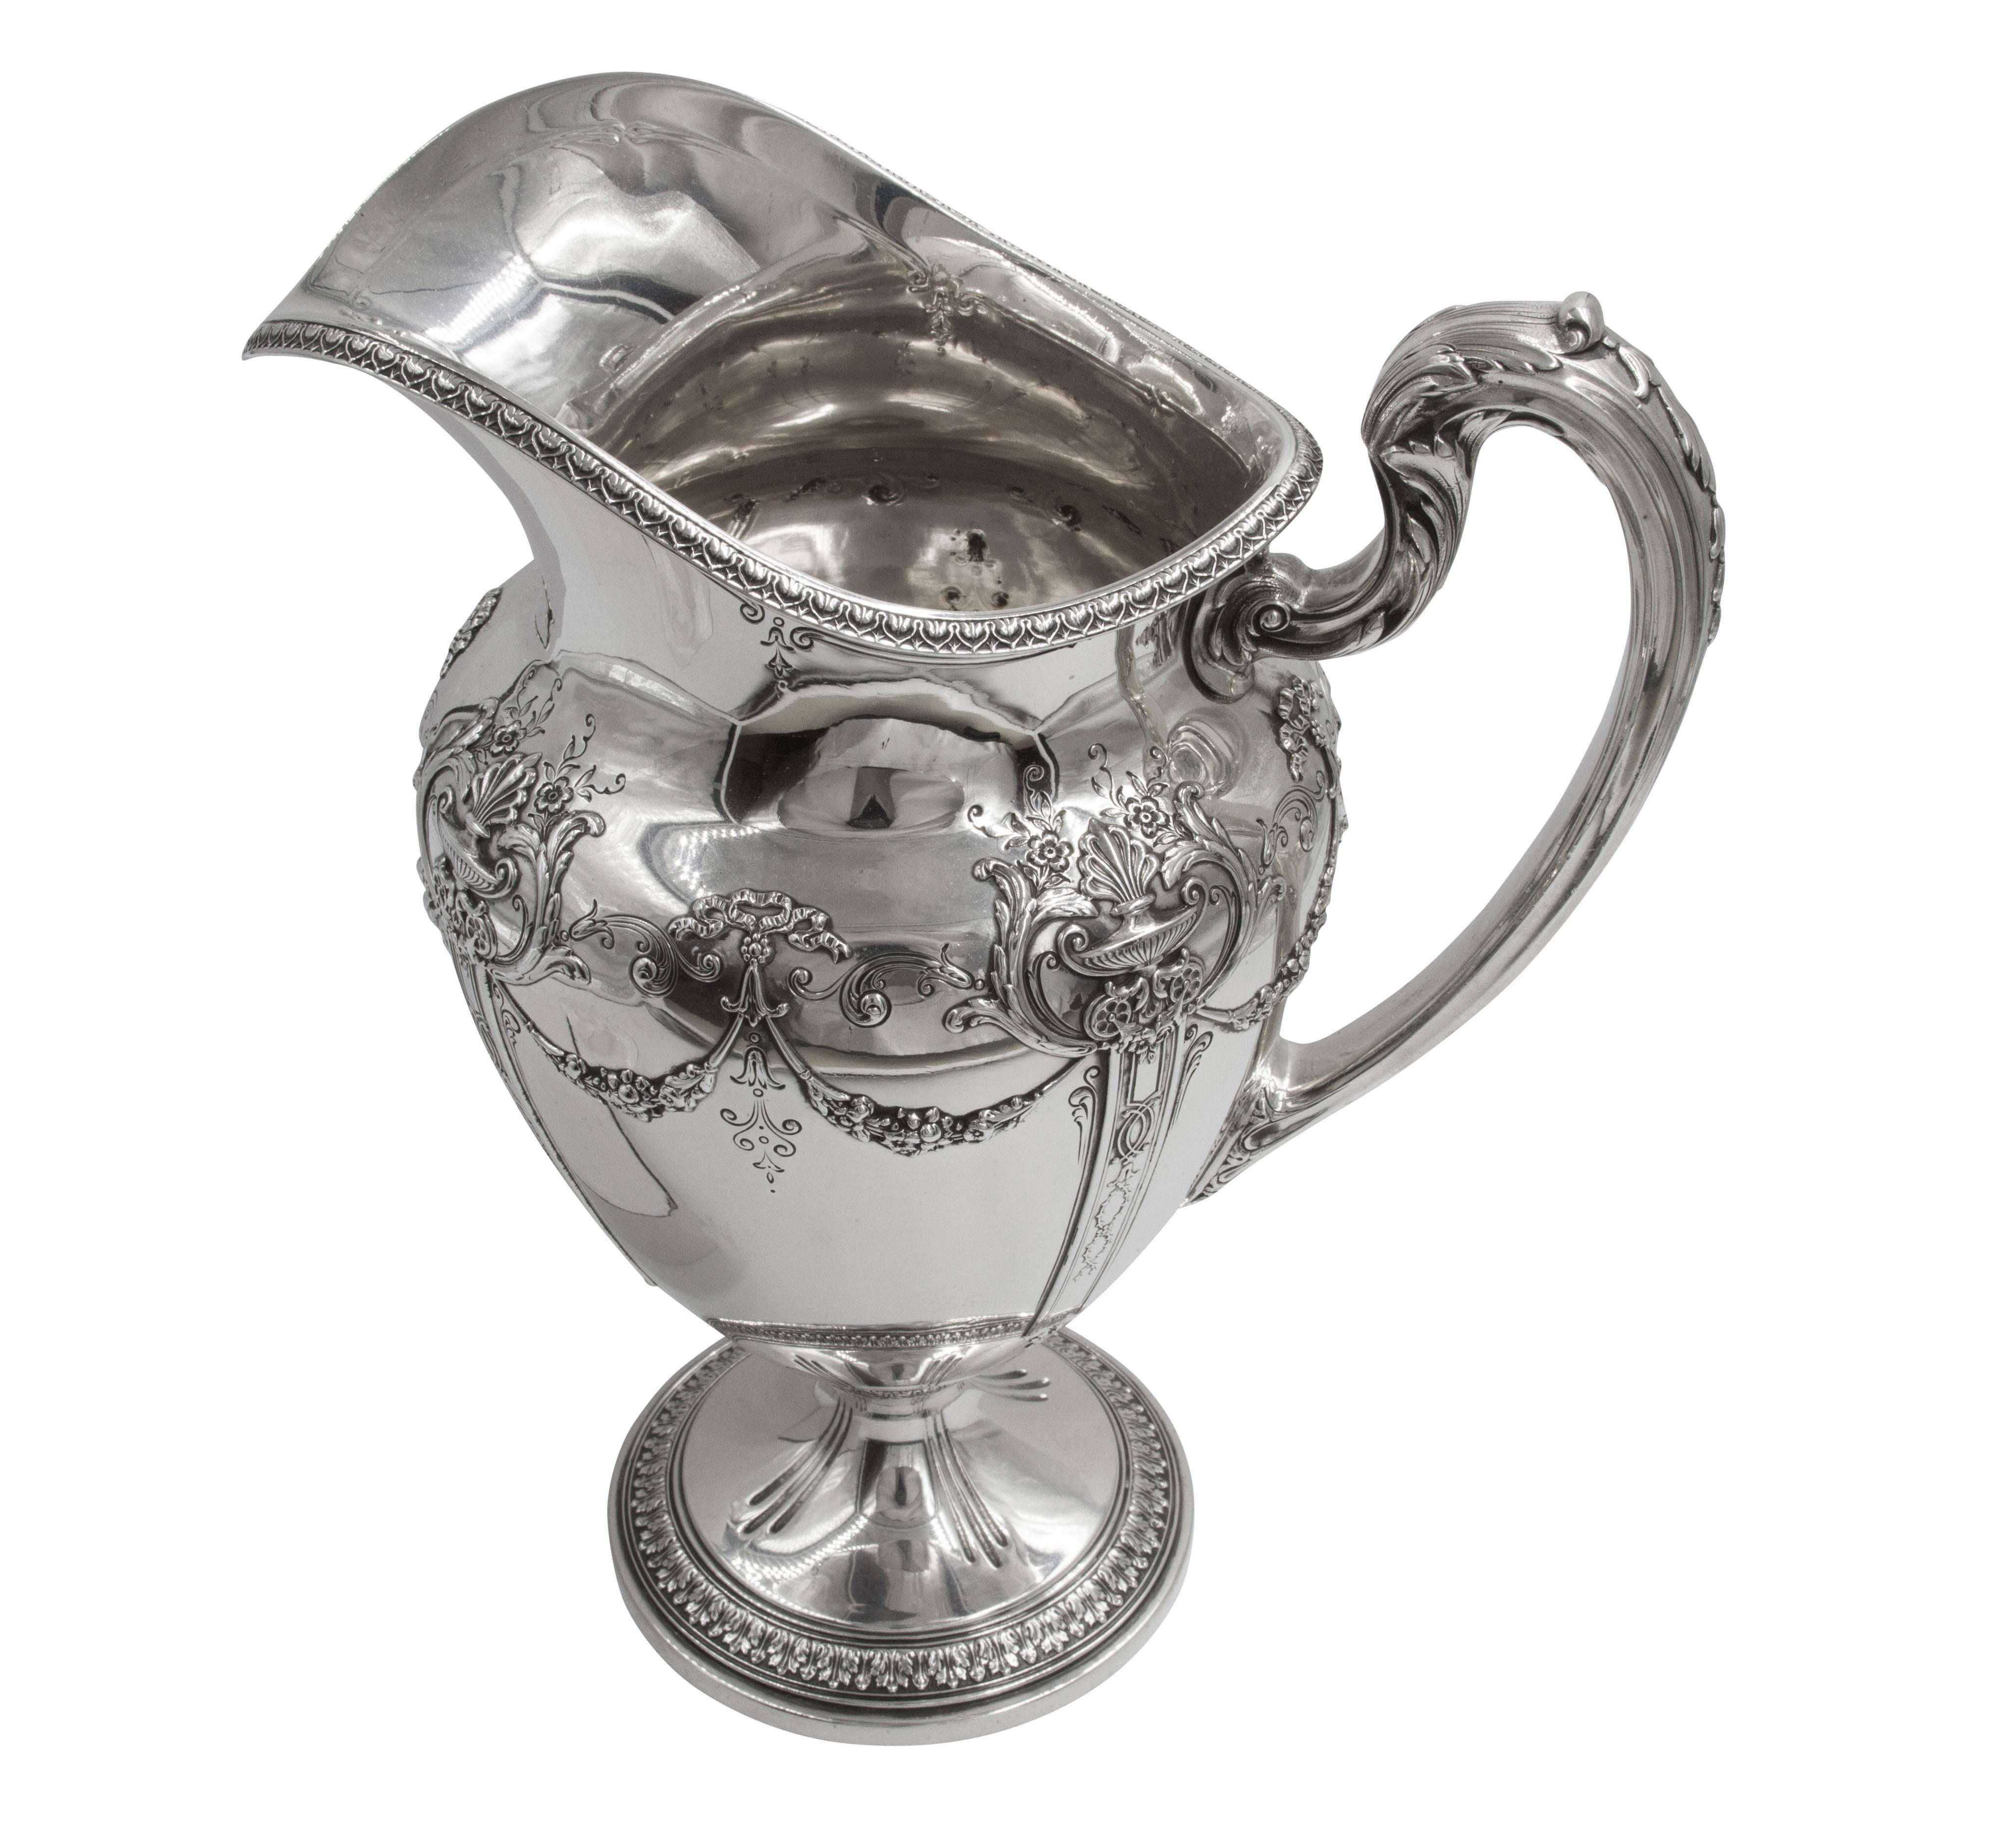 This majestic water pitcher is sure to dress up any dinner table! Being offered is a Reed & Barton pitcher with garlands and bows adorning the entire top. The arched handle has a leaf-like pattern on both the side and top. The base has four groups